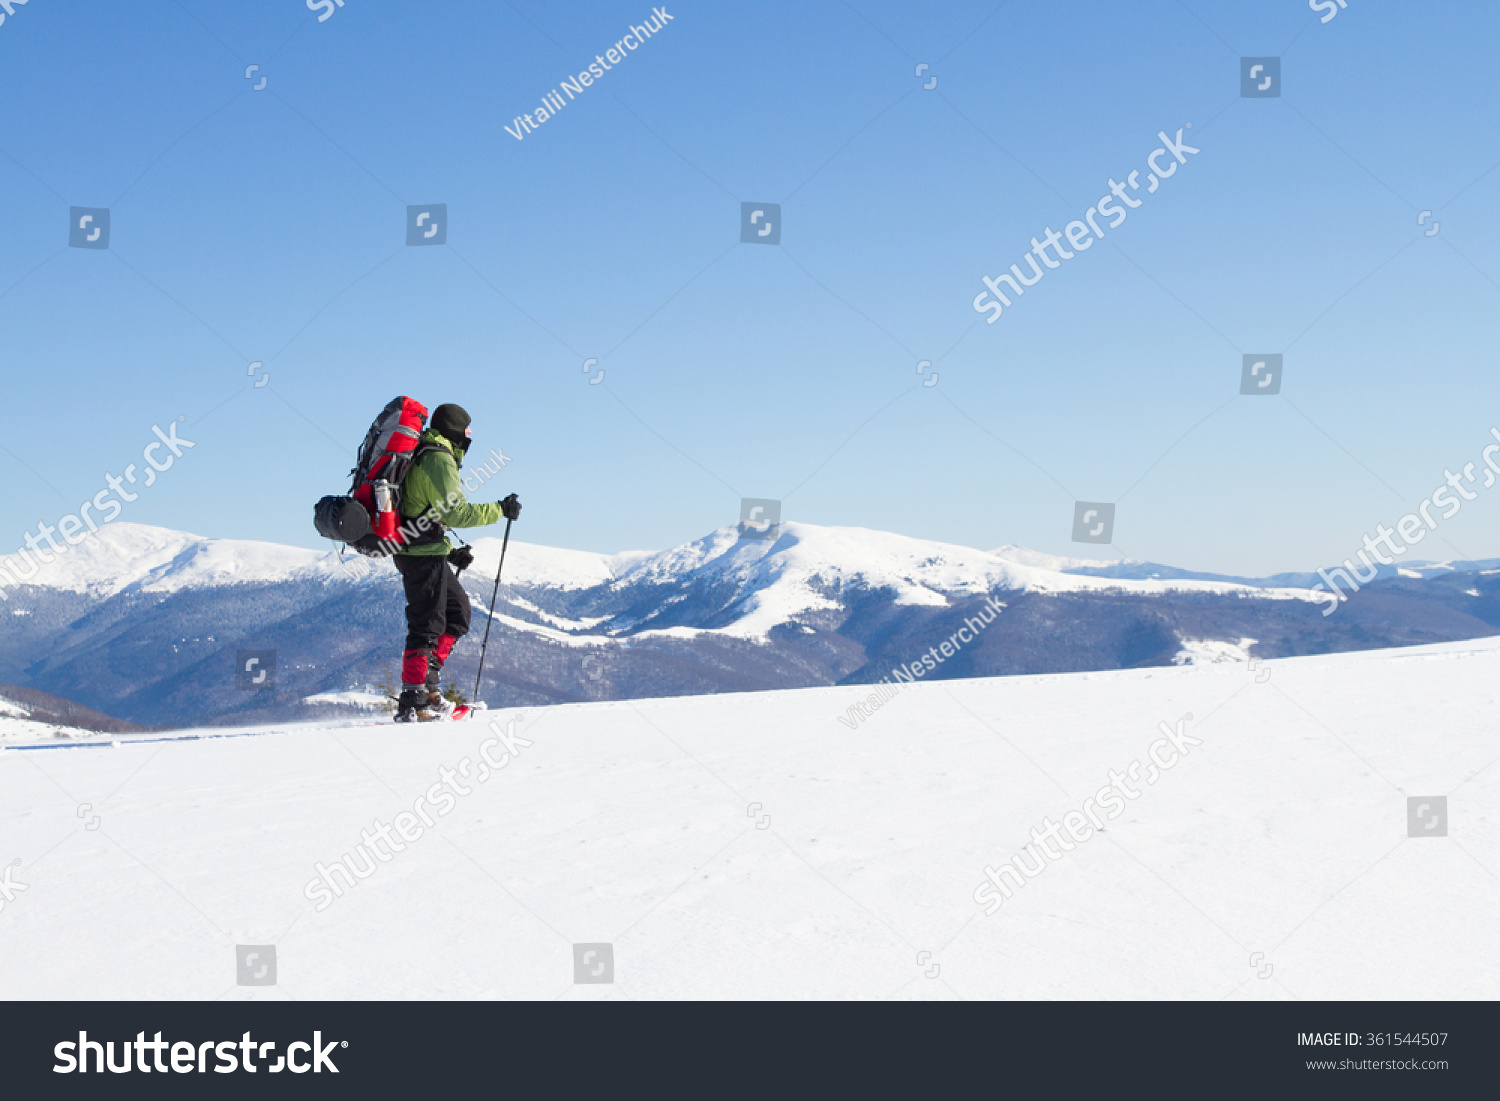 Winter hiking in the mountains on snowshoes with a backpack and tent. #361544507